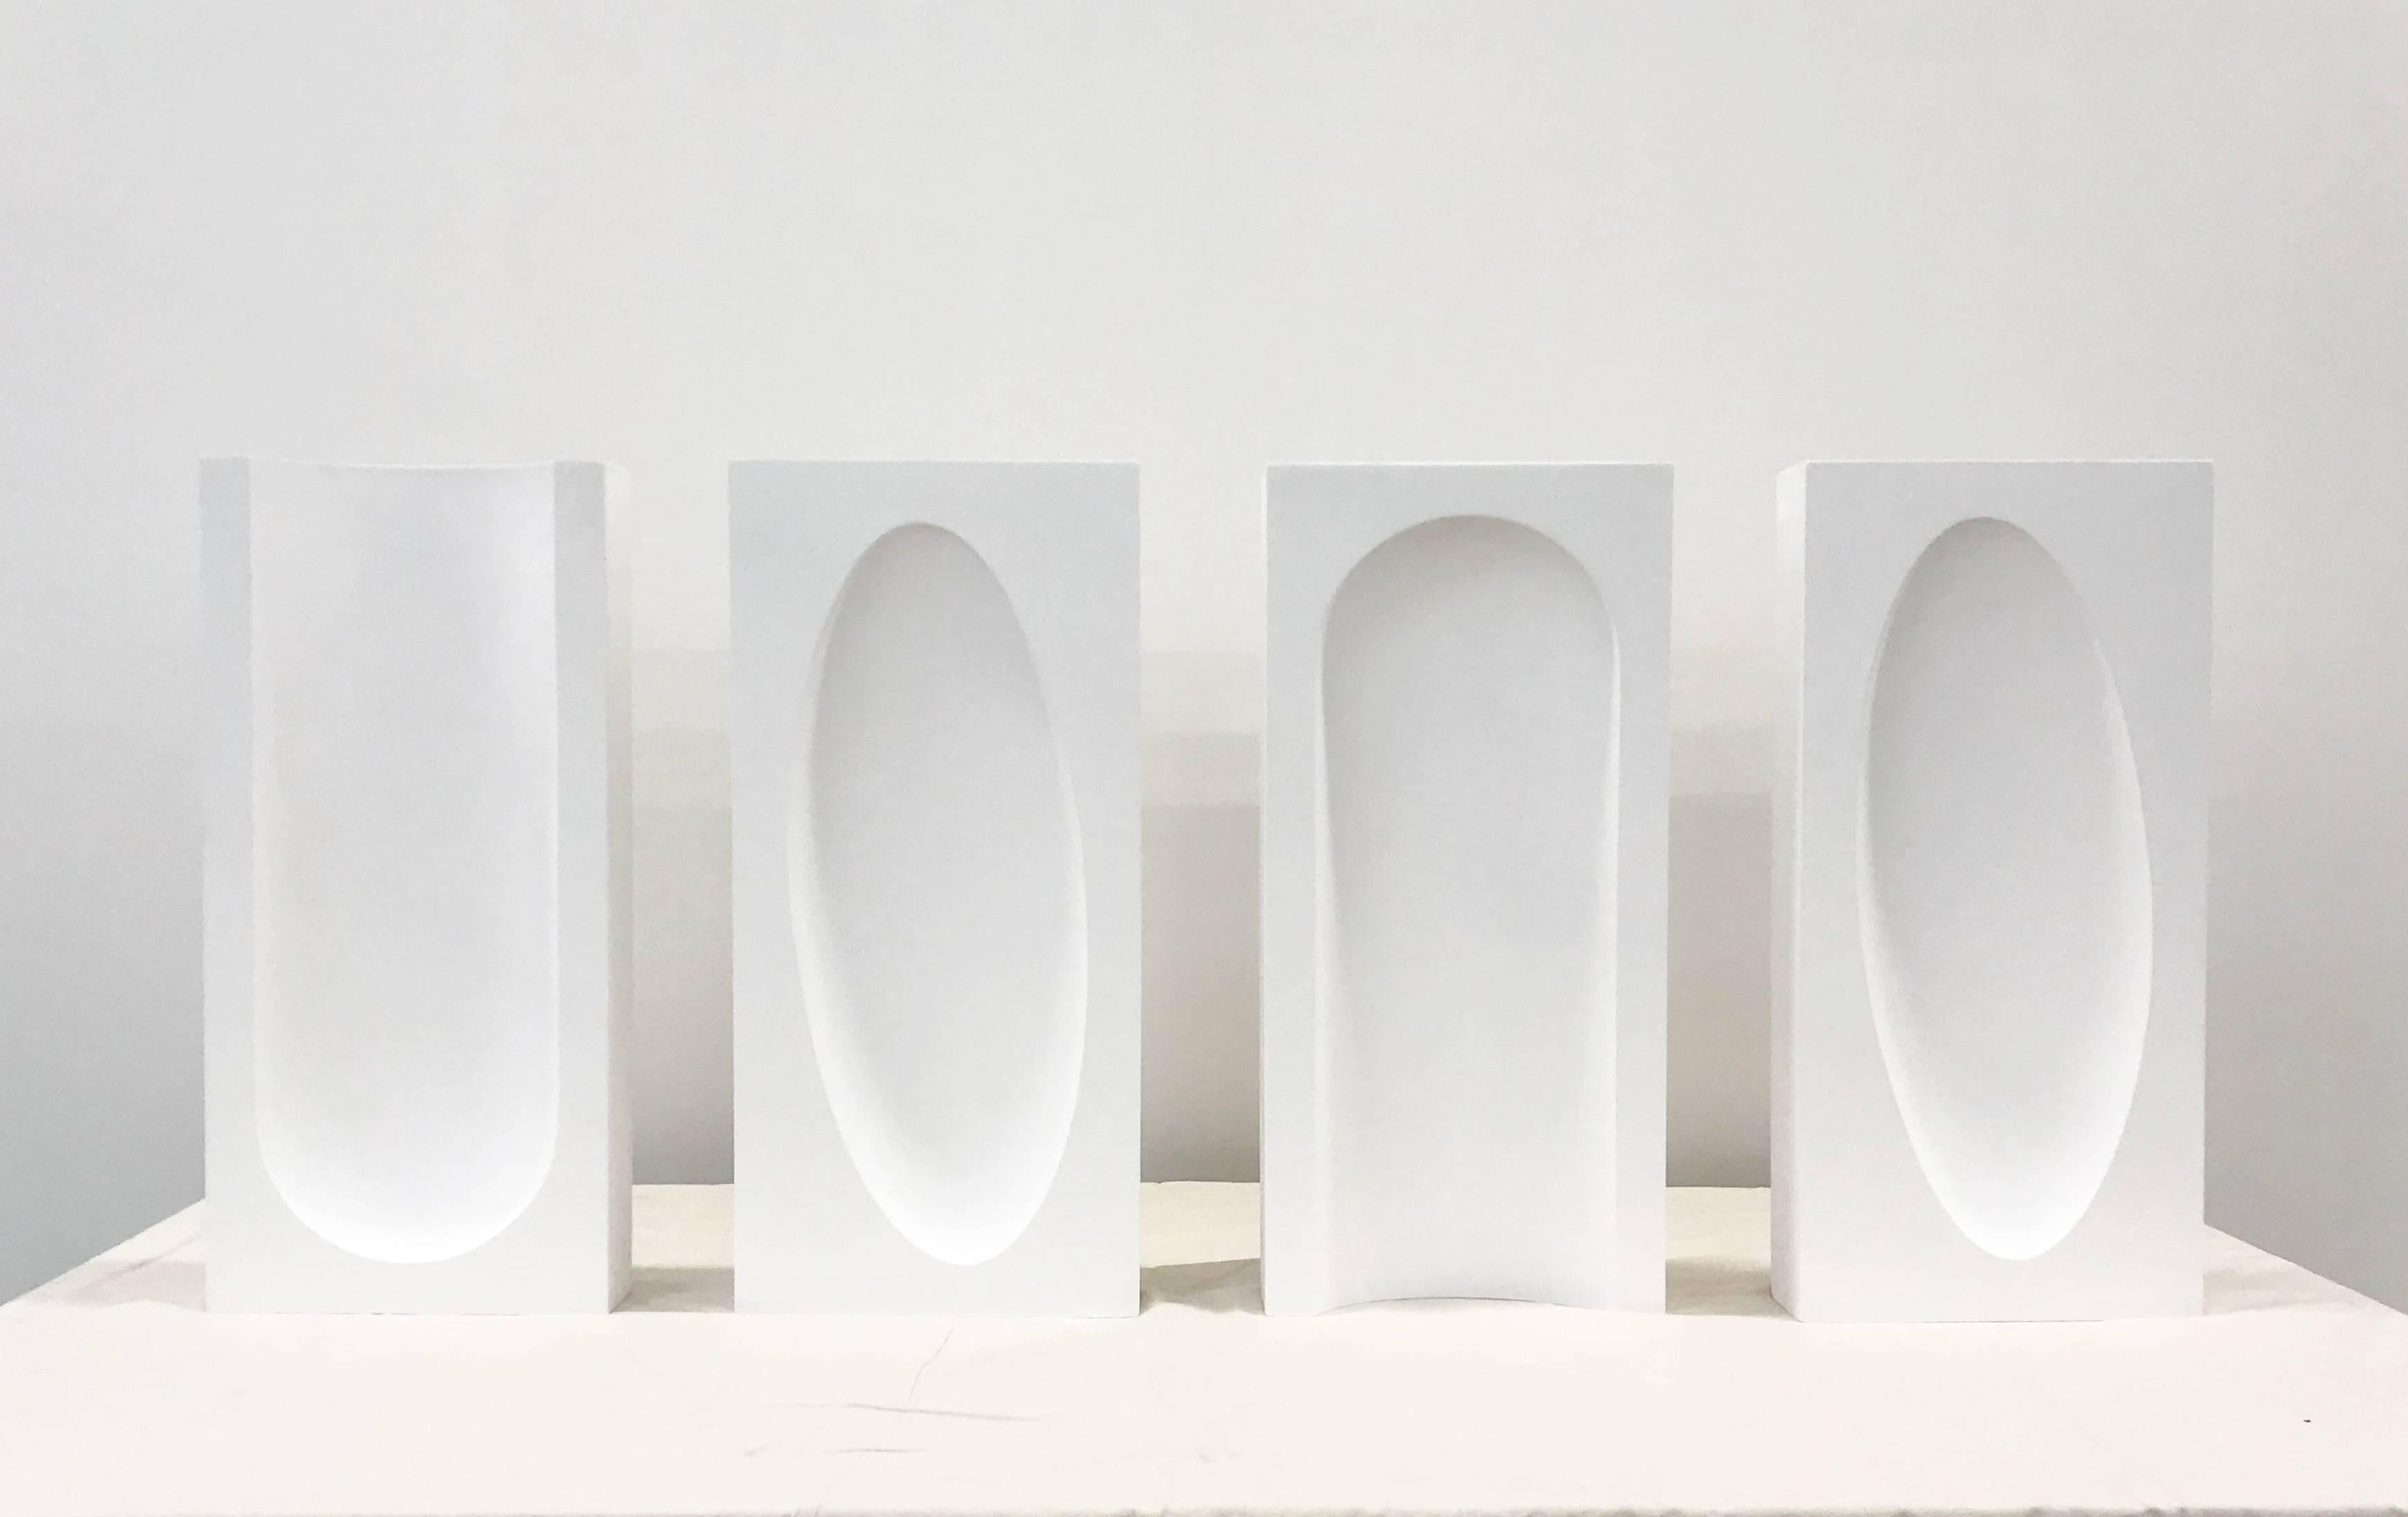 Exploration of Minimalist shapes quietly referencing Brutalist architecture. Cast by hand using unpigmented plaster, shapes can be grouped together or purchased as one striking, bold statement. 

Sculptures can be placed as art accessories on tables